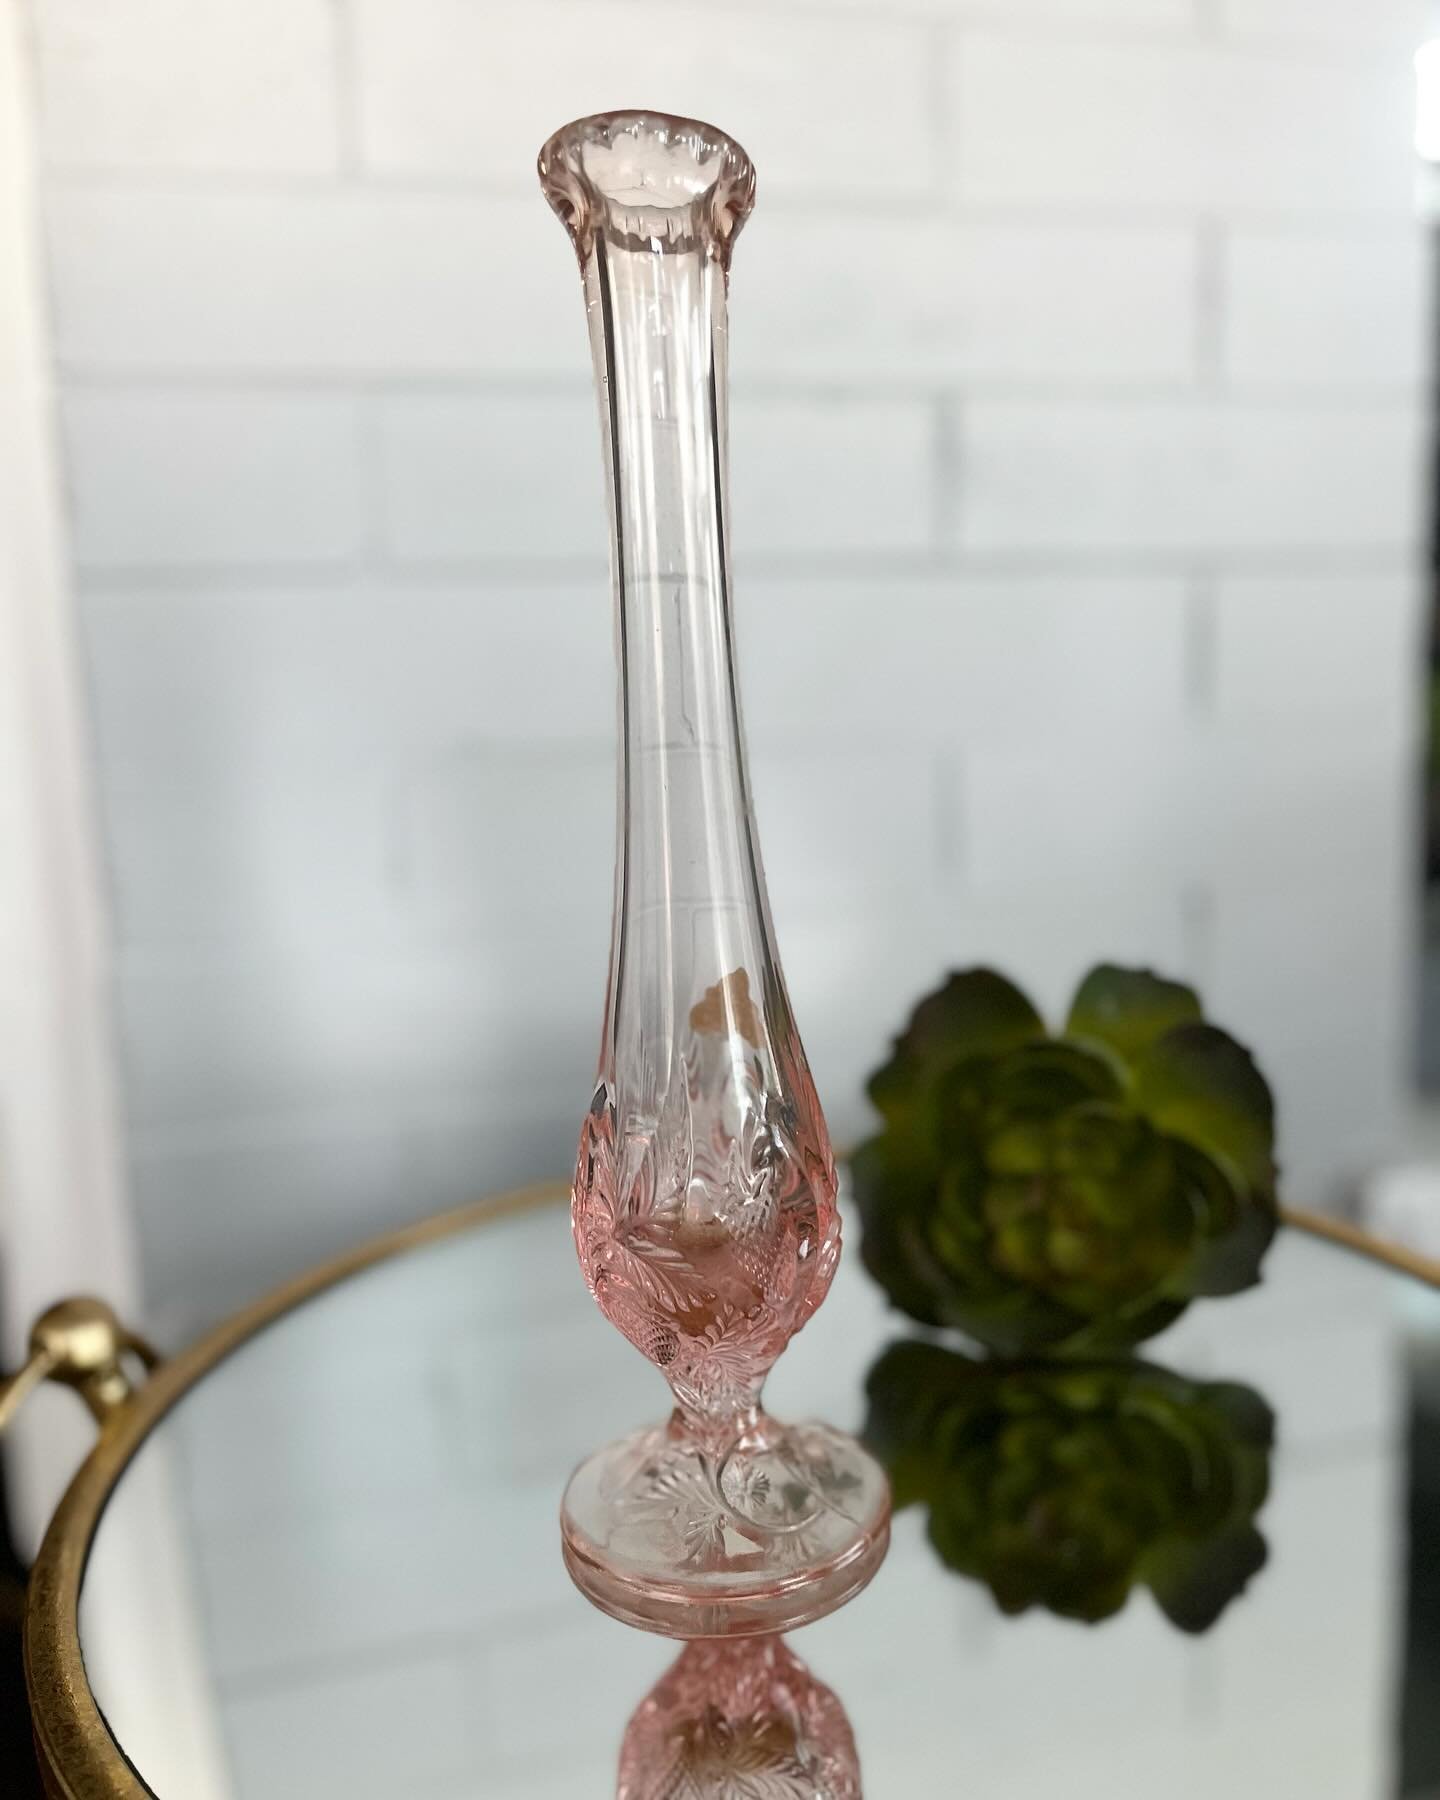 Adorable Vintage Fenton Swung/Pedestal Strawberry Vine Bud Vase in Excellent Condition. Available for $50 💕🍓

Vintage items are pre-owned and may show signs of age, love, and character.

- Comment SOLD on item or DM to purchase. 
- Venmo and Square